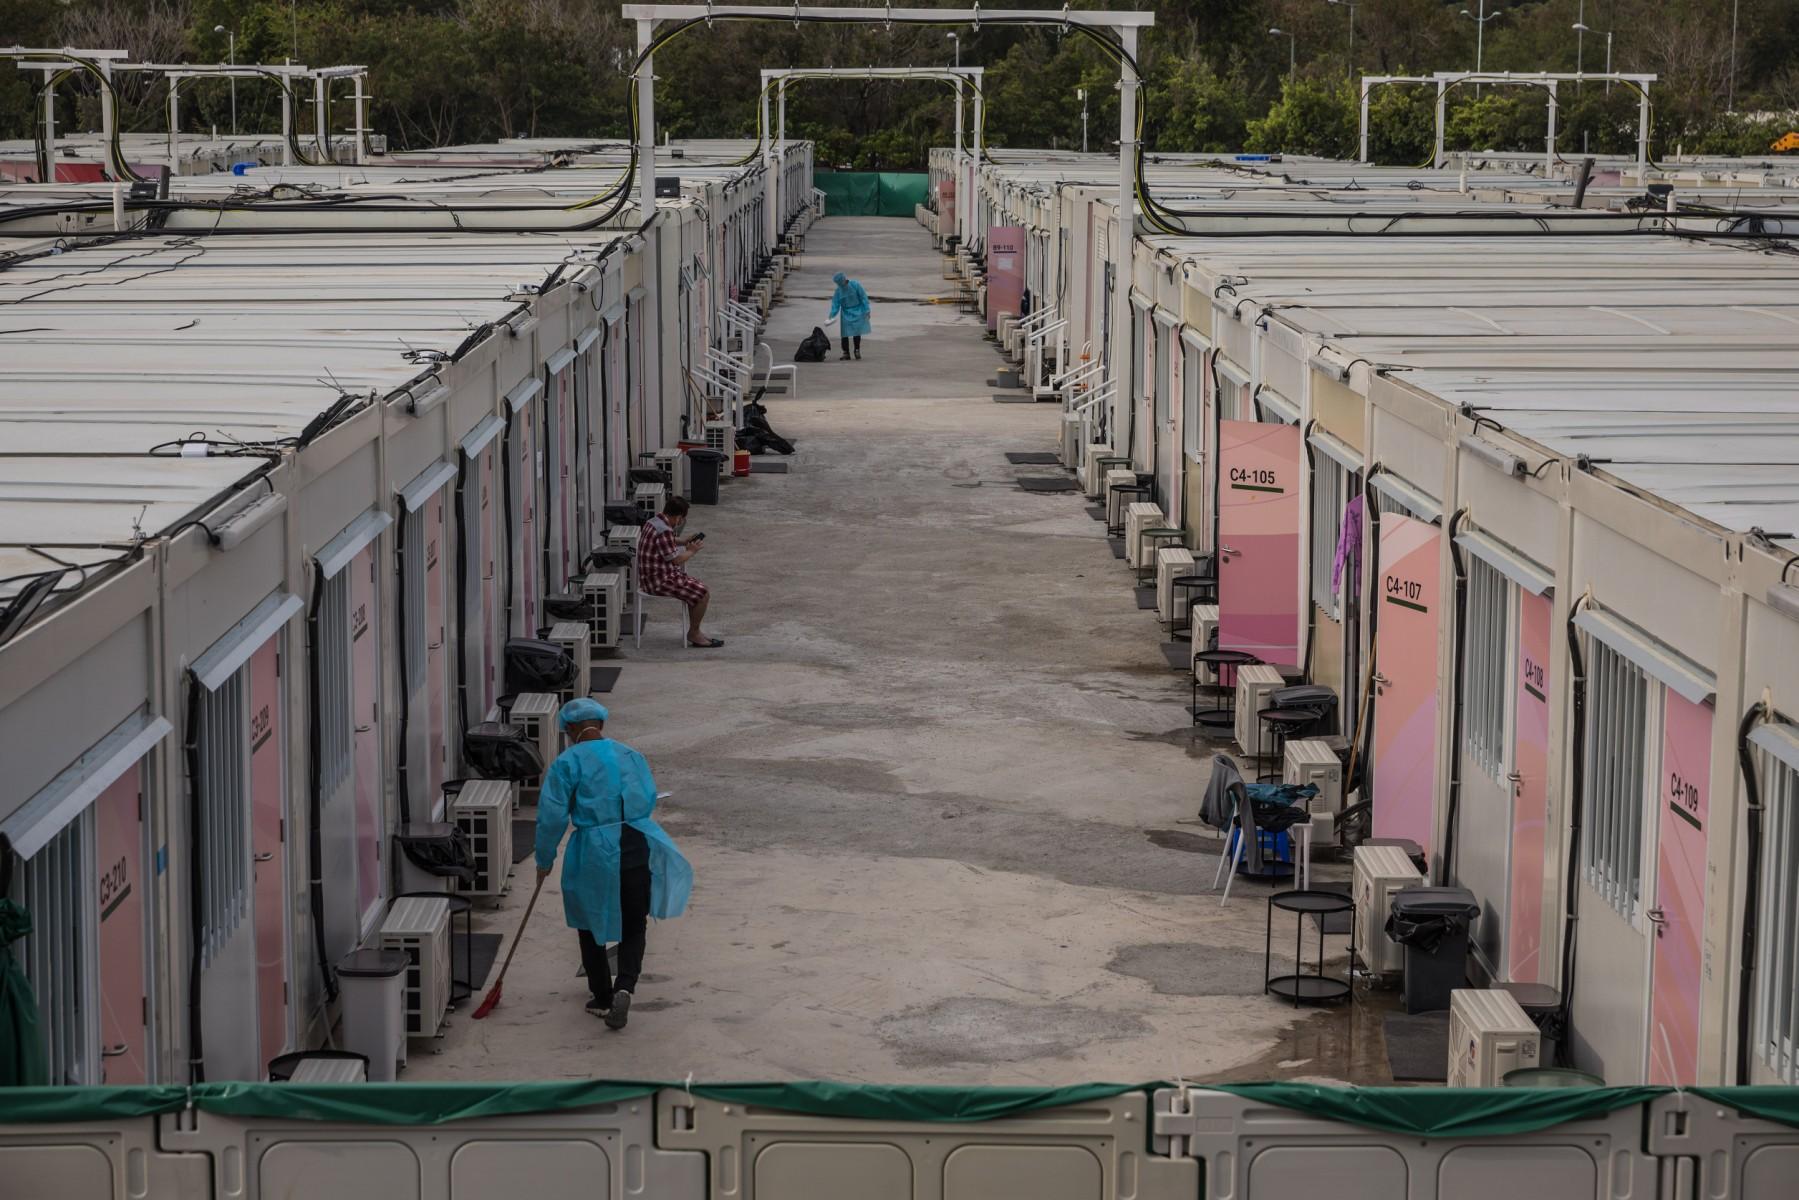 Workers wearing personal protective equipment clean next to cabins as a man (centre) uses his phone at a temporary isolation facility housing Covid-19 patients in the San Tin area of Hong Kong on March 16. Photo: AFP